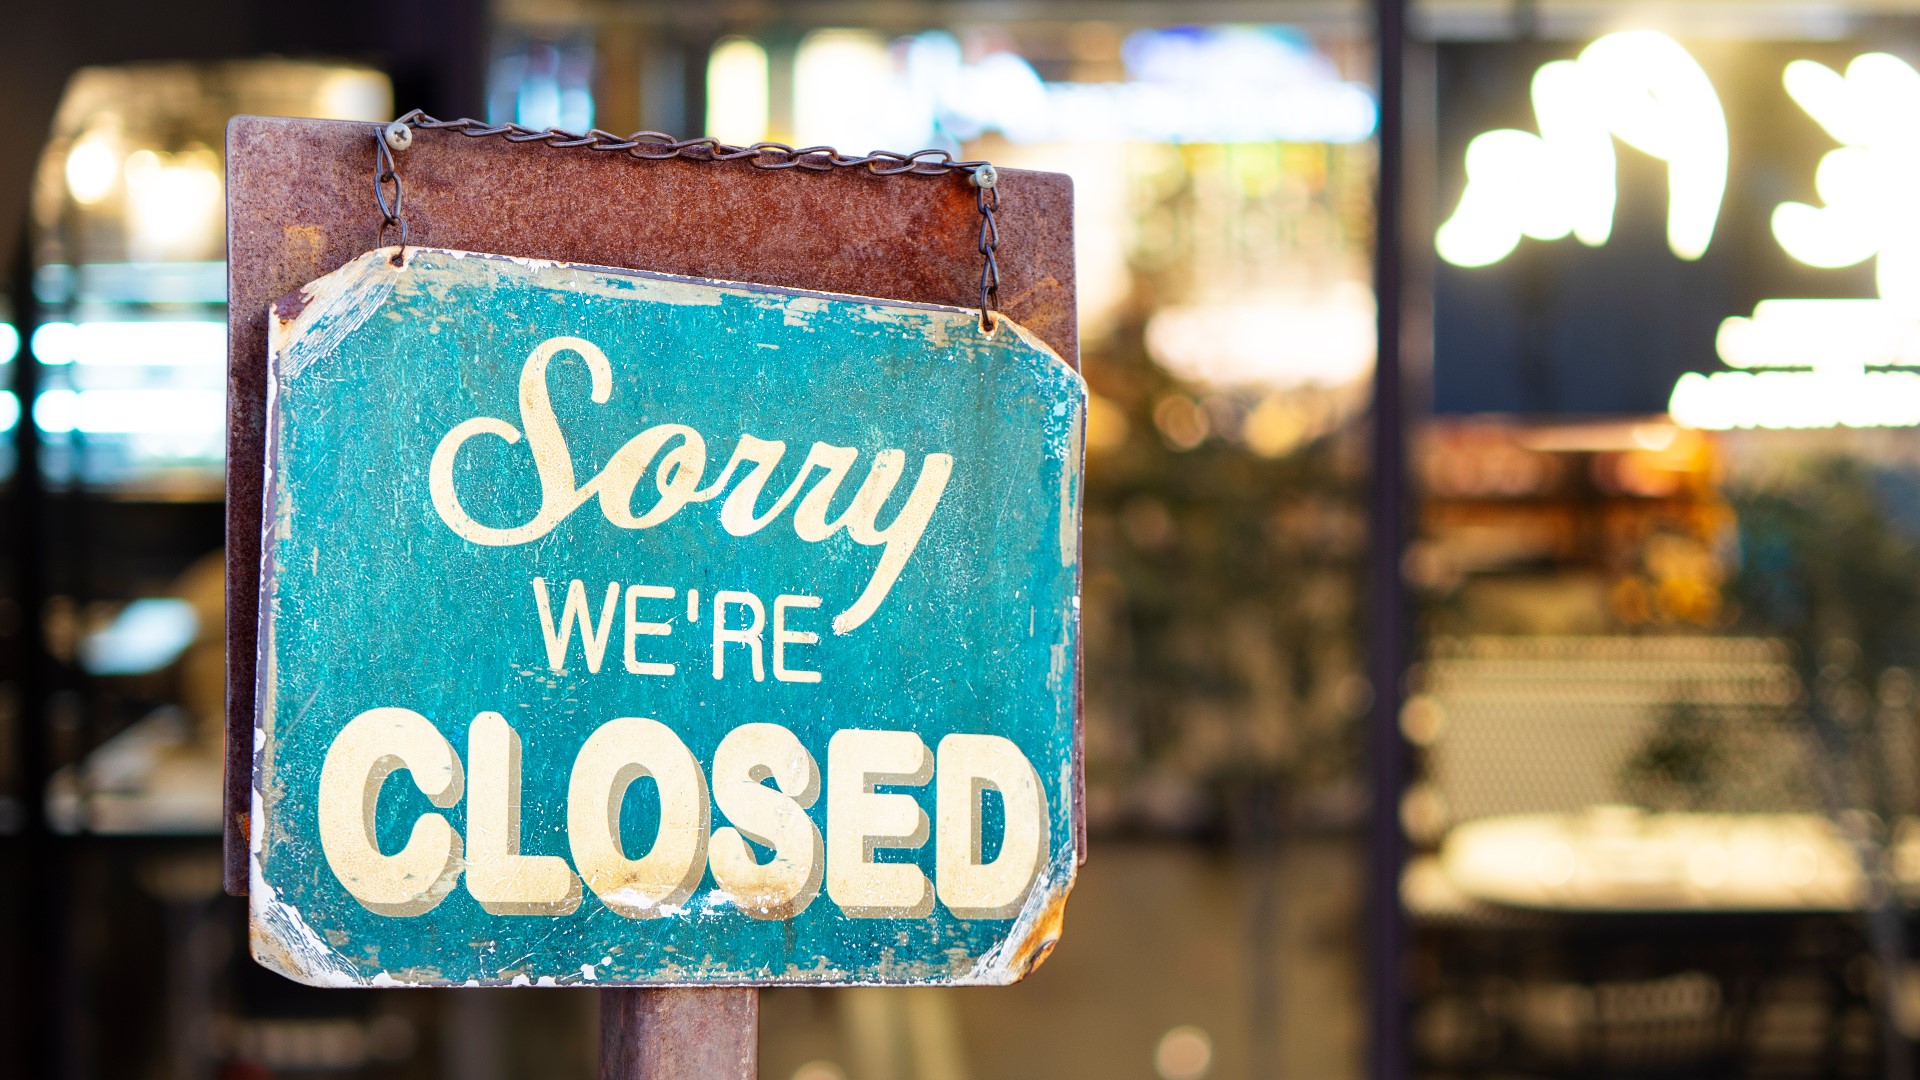 More locally owned businesses in Charlotte are closing because of the coronavirus pandemic, including a restaurant that first opened in charlotte 30 years ago.